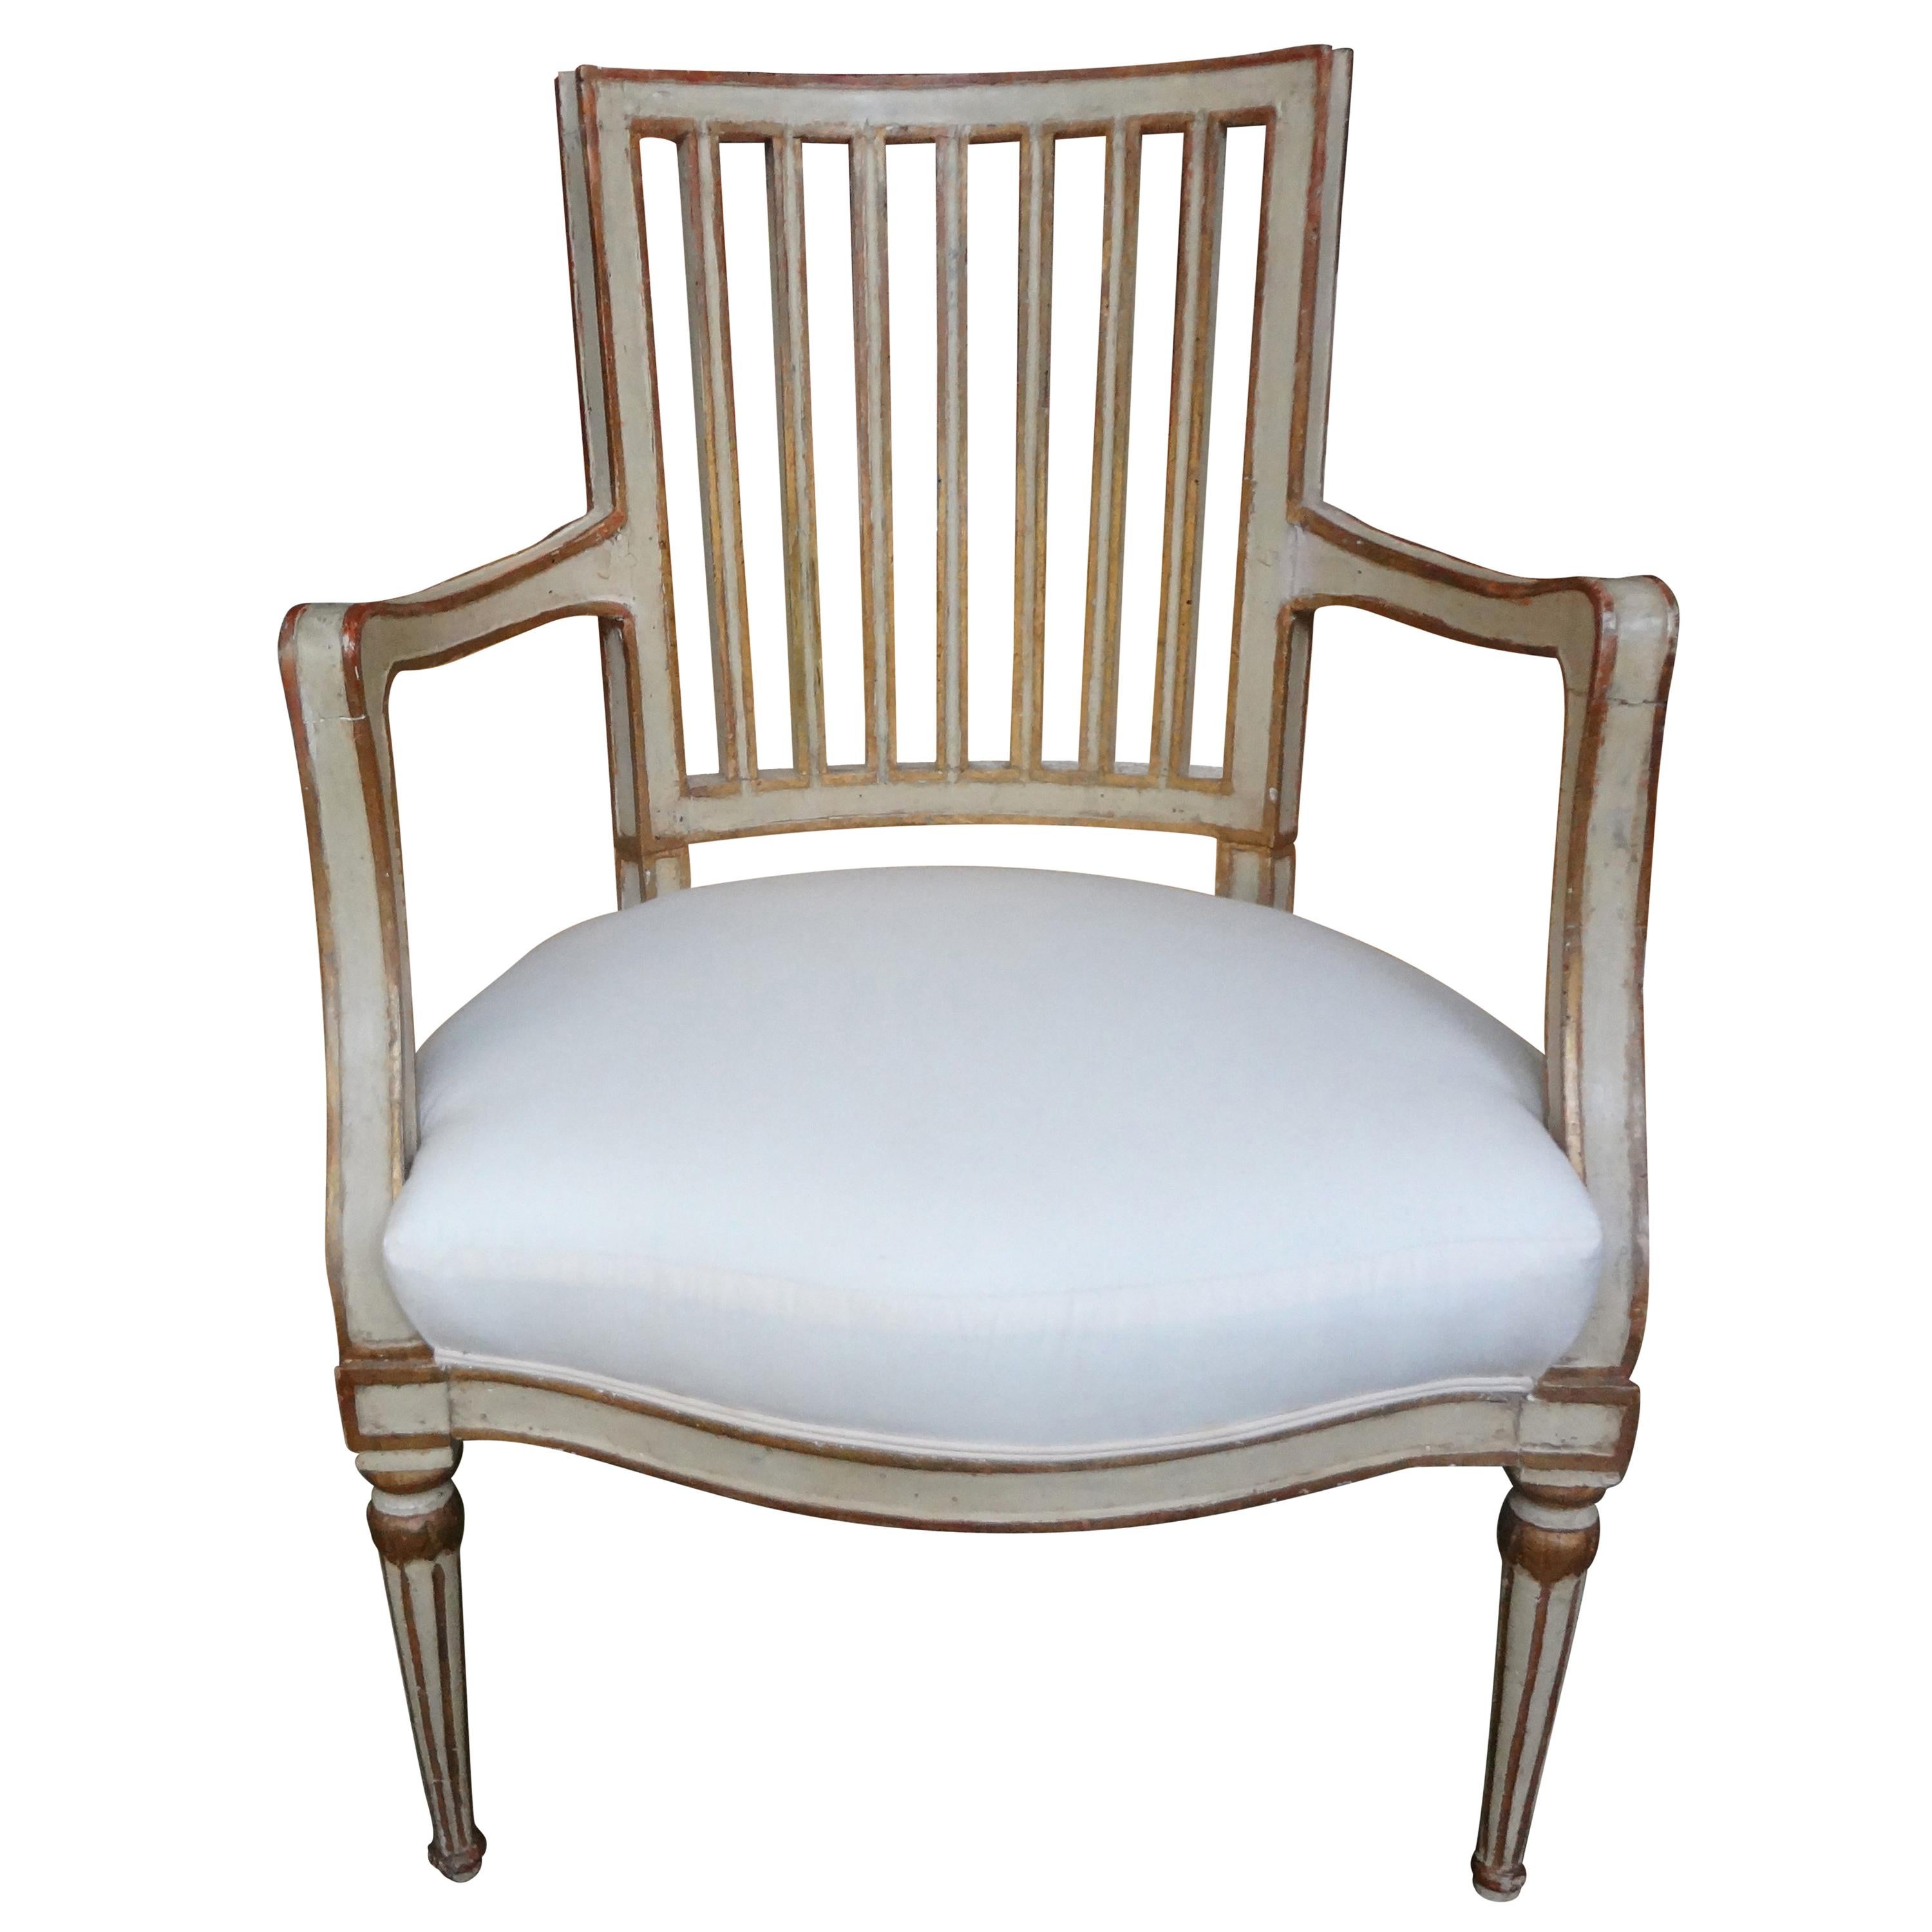 19th Century Swedish Gustavian Style Painted and Gilt Wood Chair